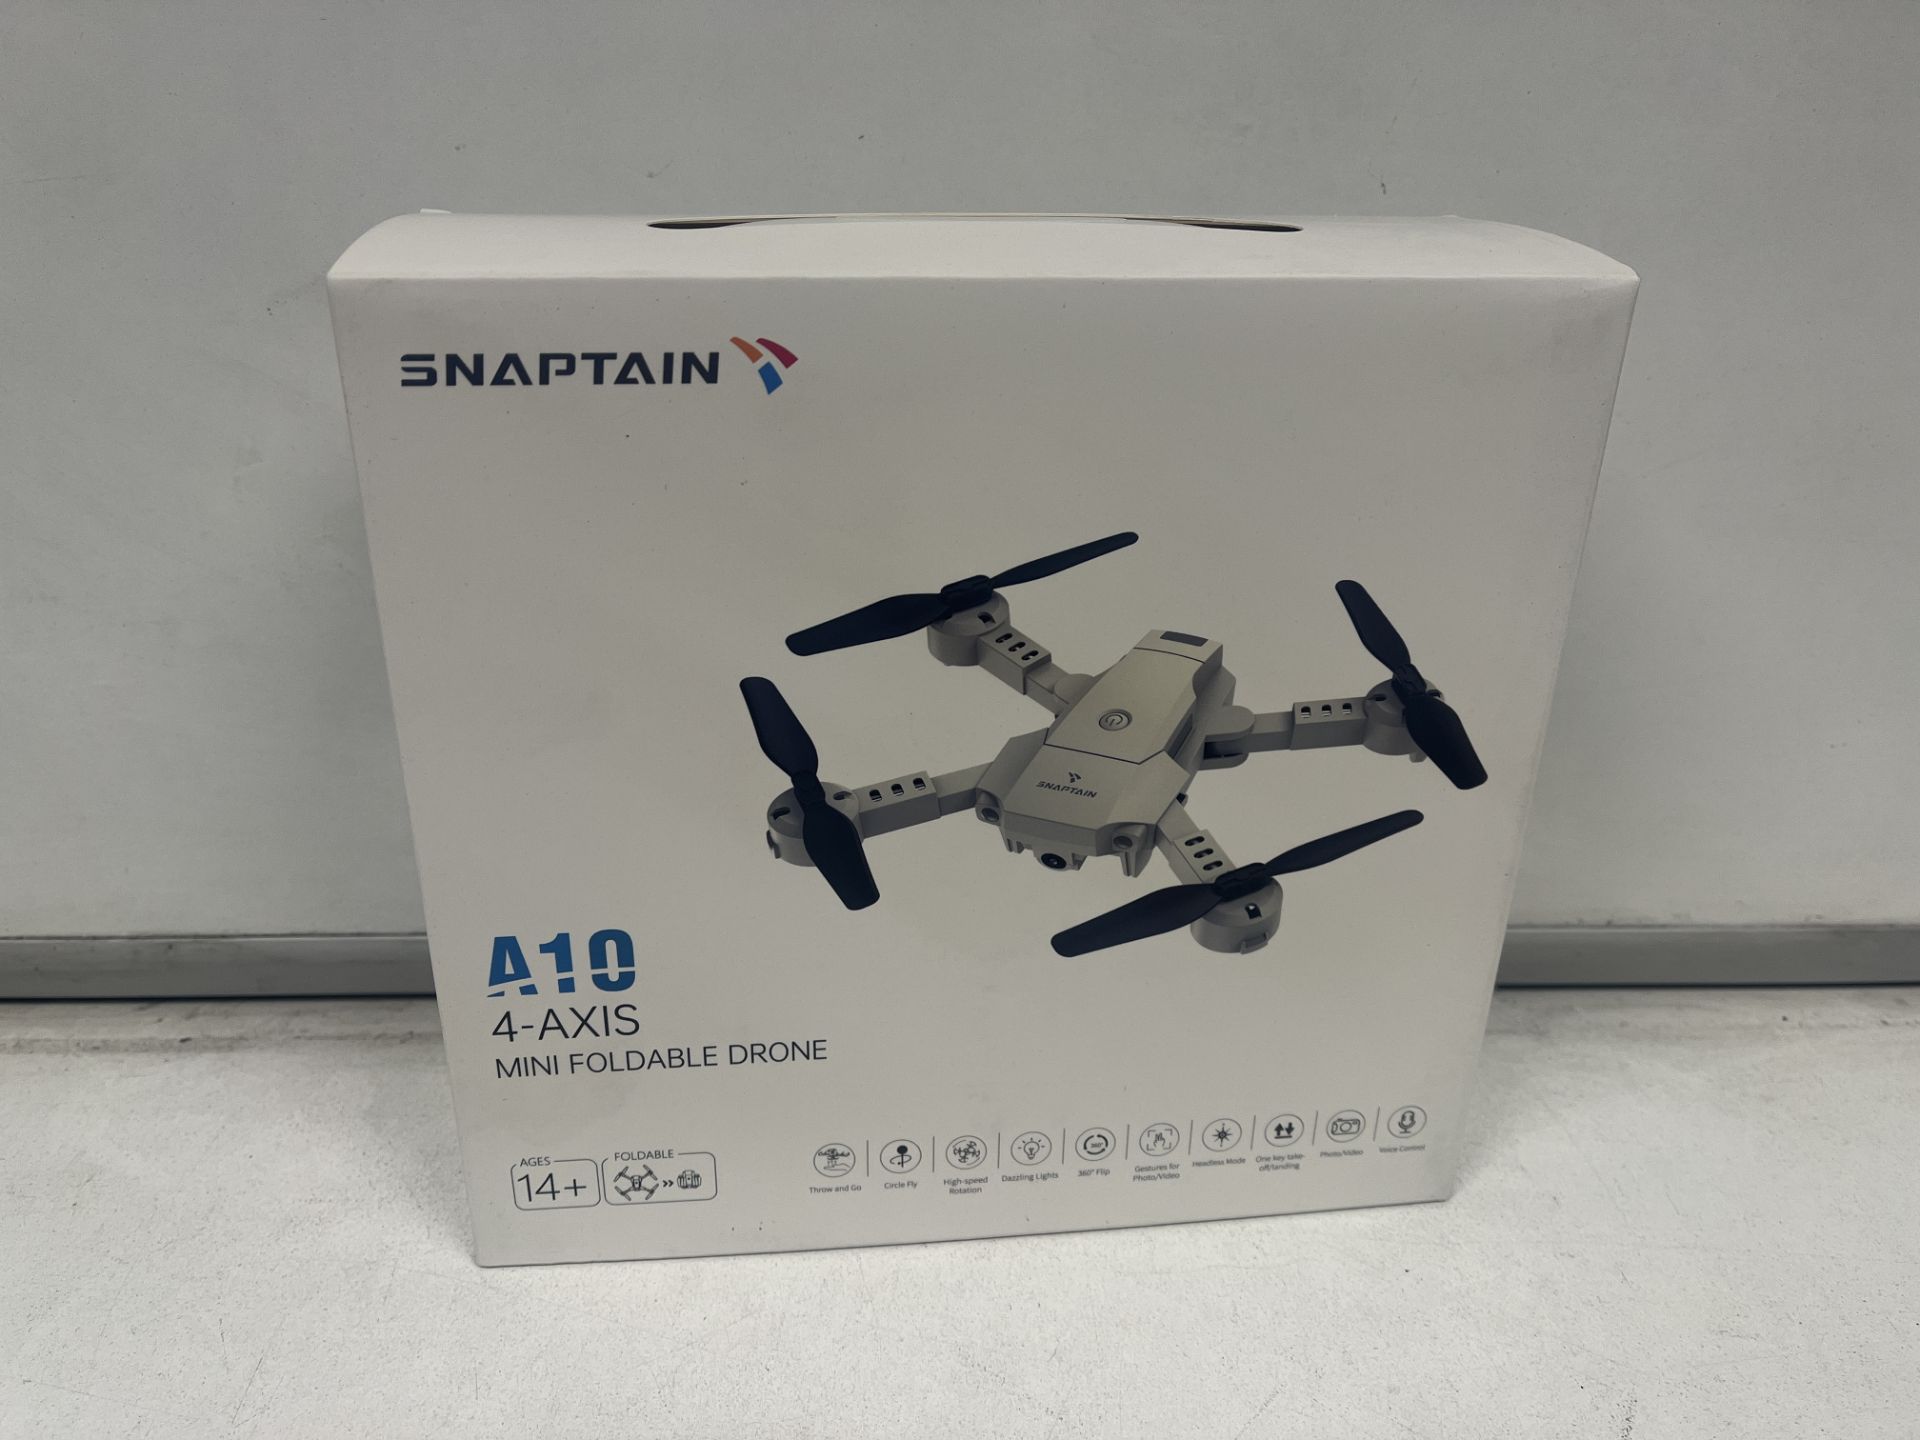 SNAPTAIN A10 4 AXIS MINI FOLDABLE DRONE